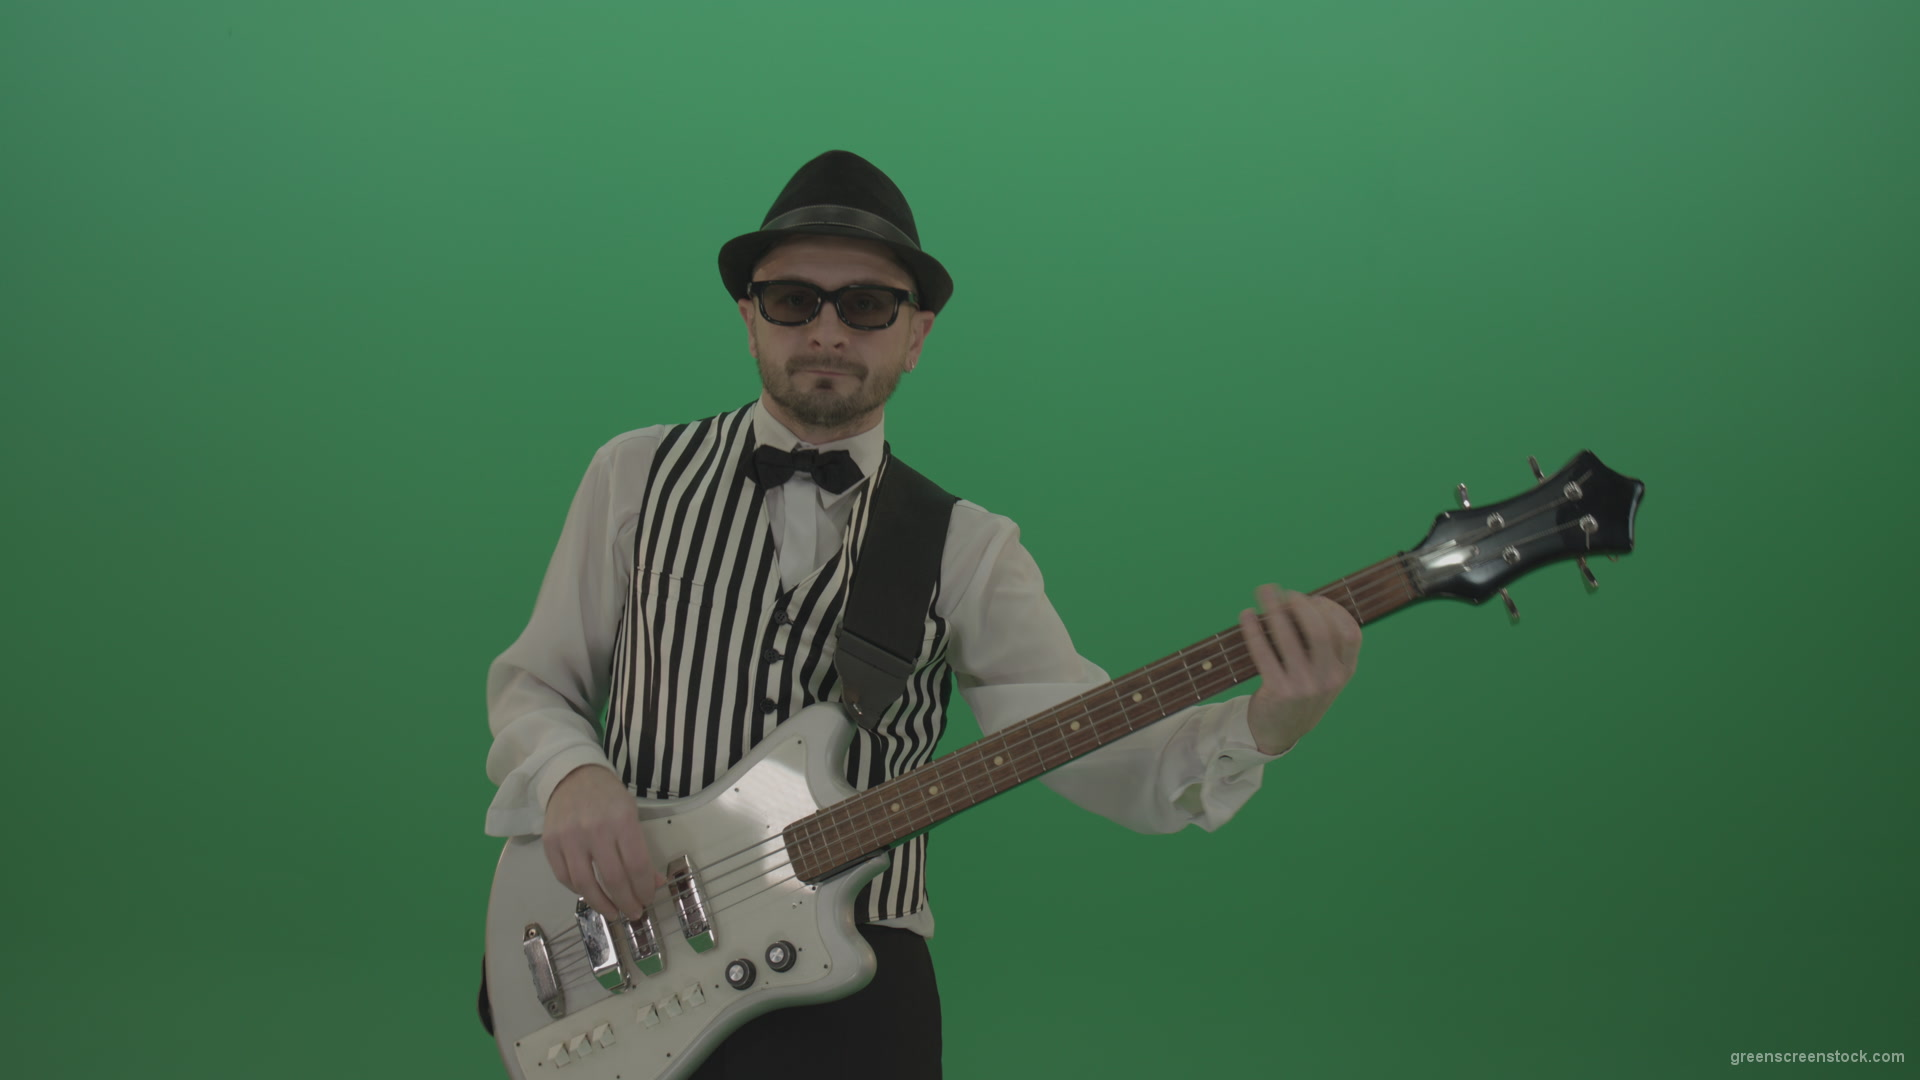 Guitar-player-browses-the-bass-guitar-playing-solo-and-charismatically-shows-facial-expressions_009 Green Screen Stock